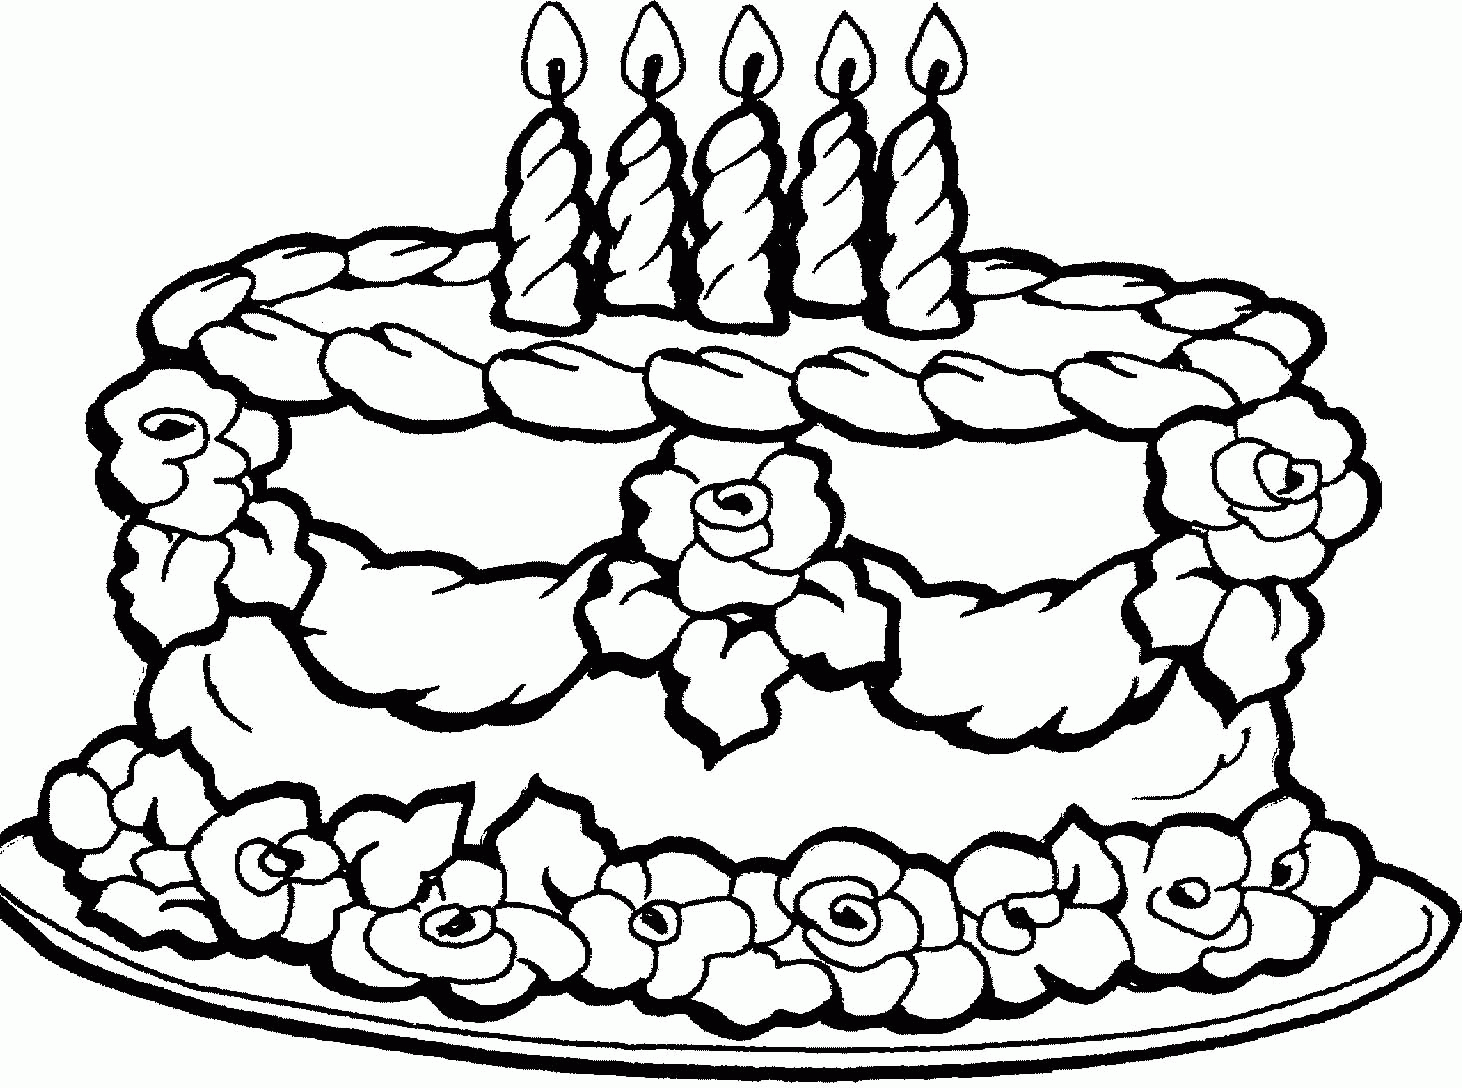 Happy Birthday Cake Coloring Pages Coloring Home